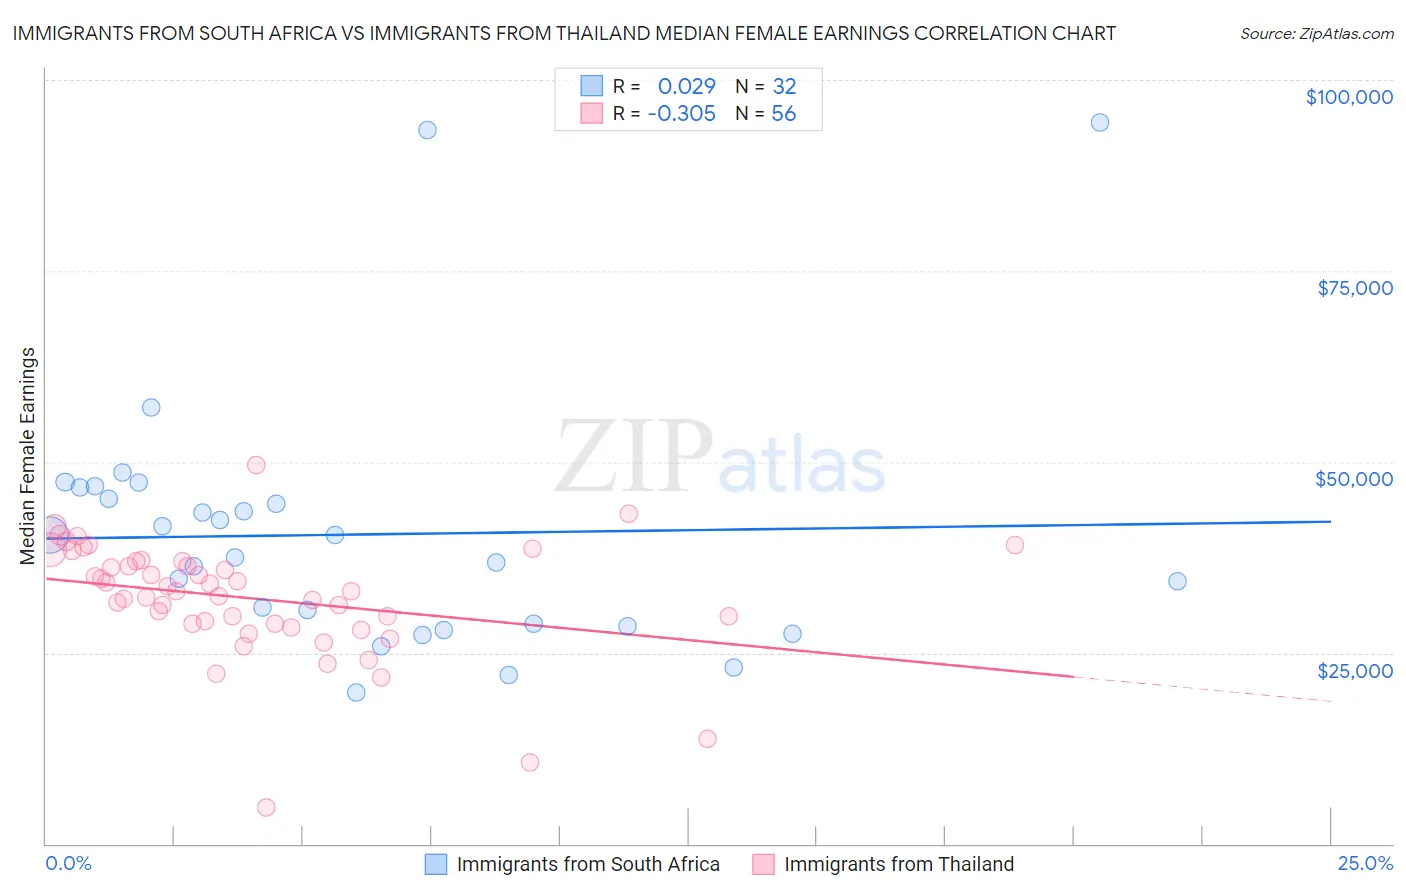 Immigrants from South Africa vs Immigrants from Thailand Median Female Earnings